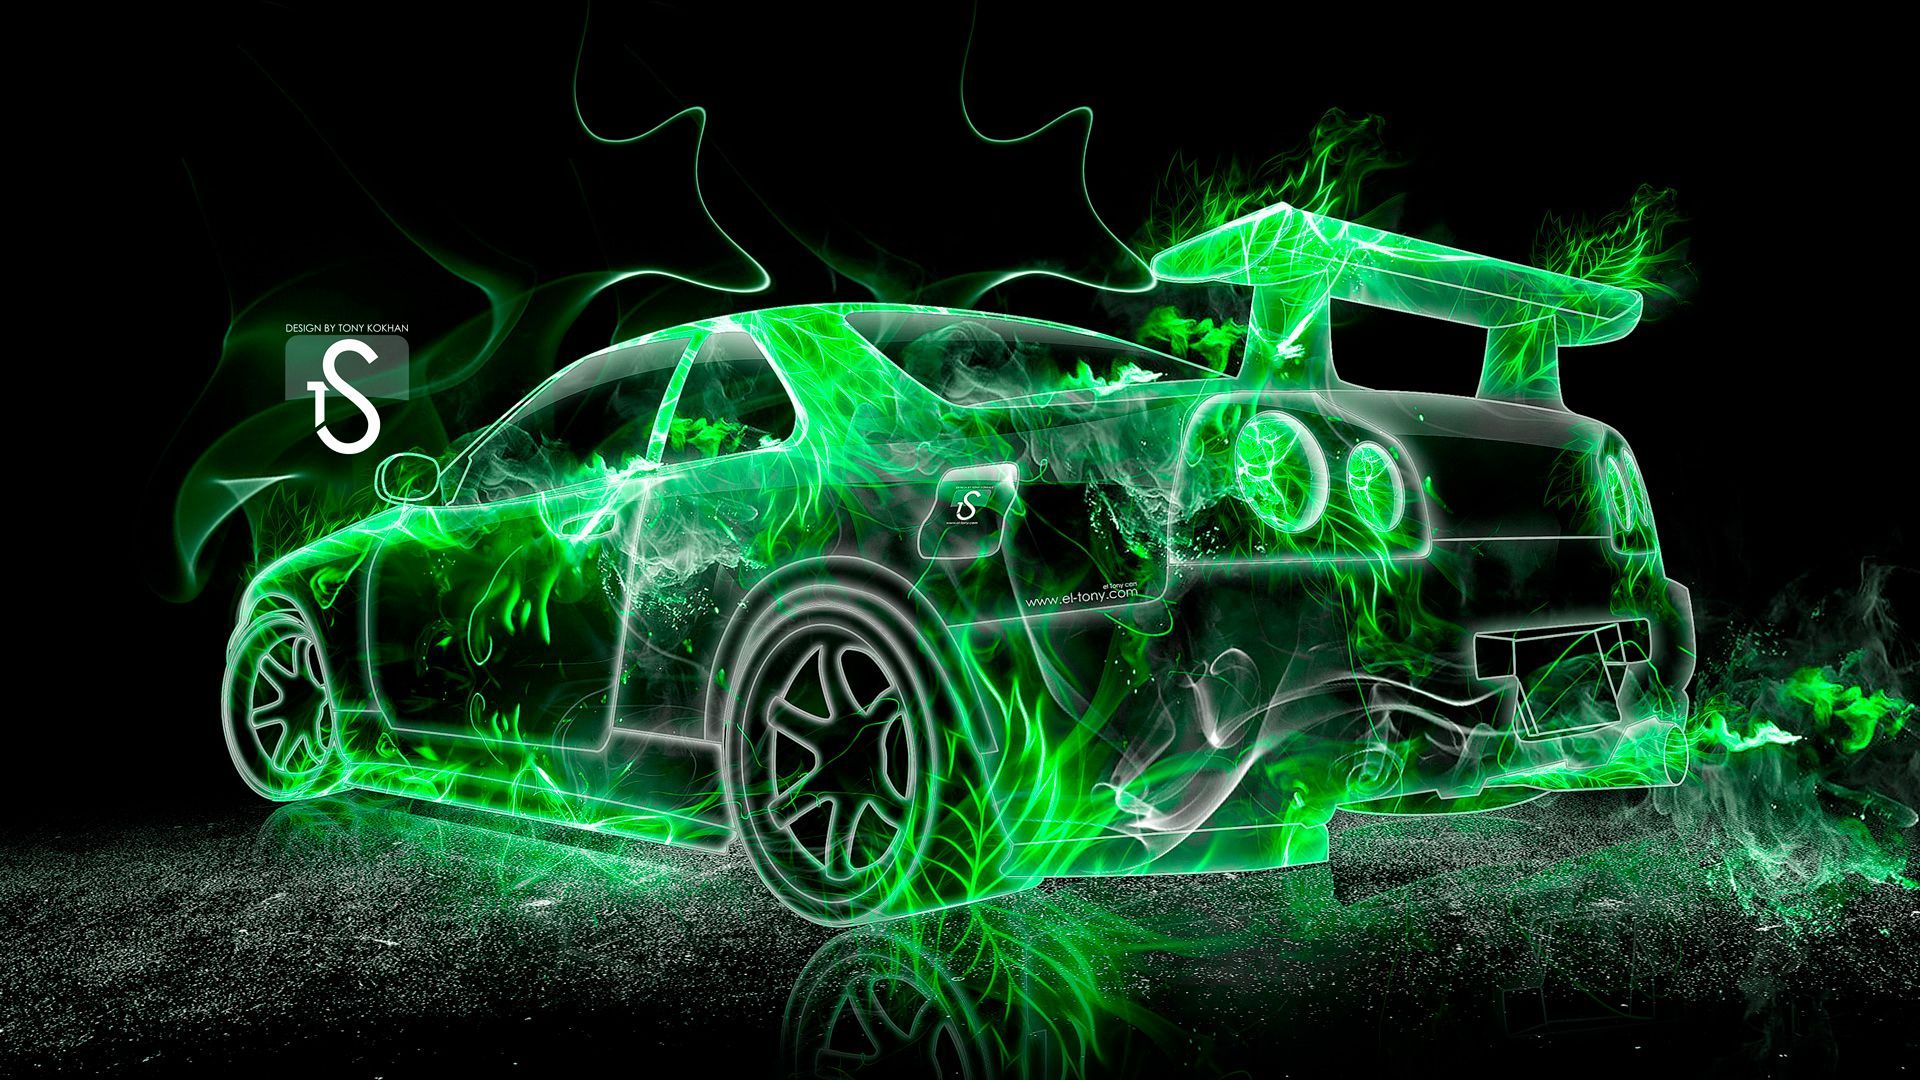 Neon Car Pictures  Download Free Images on Unsplash